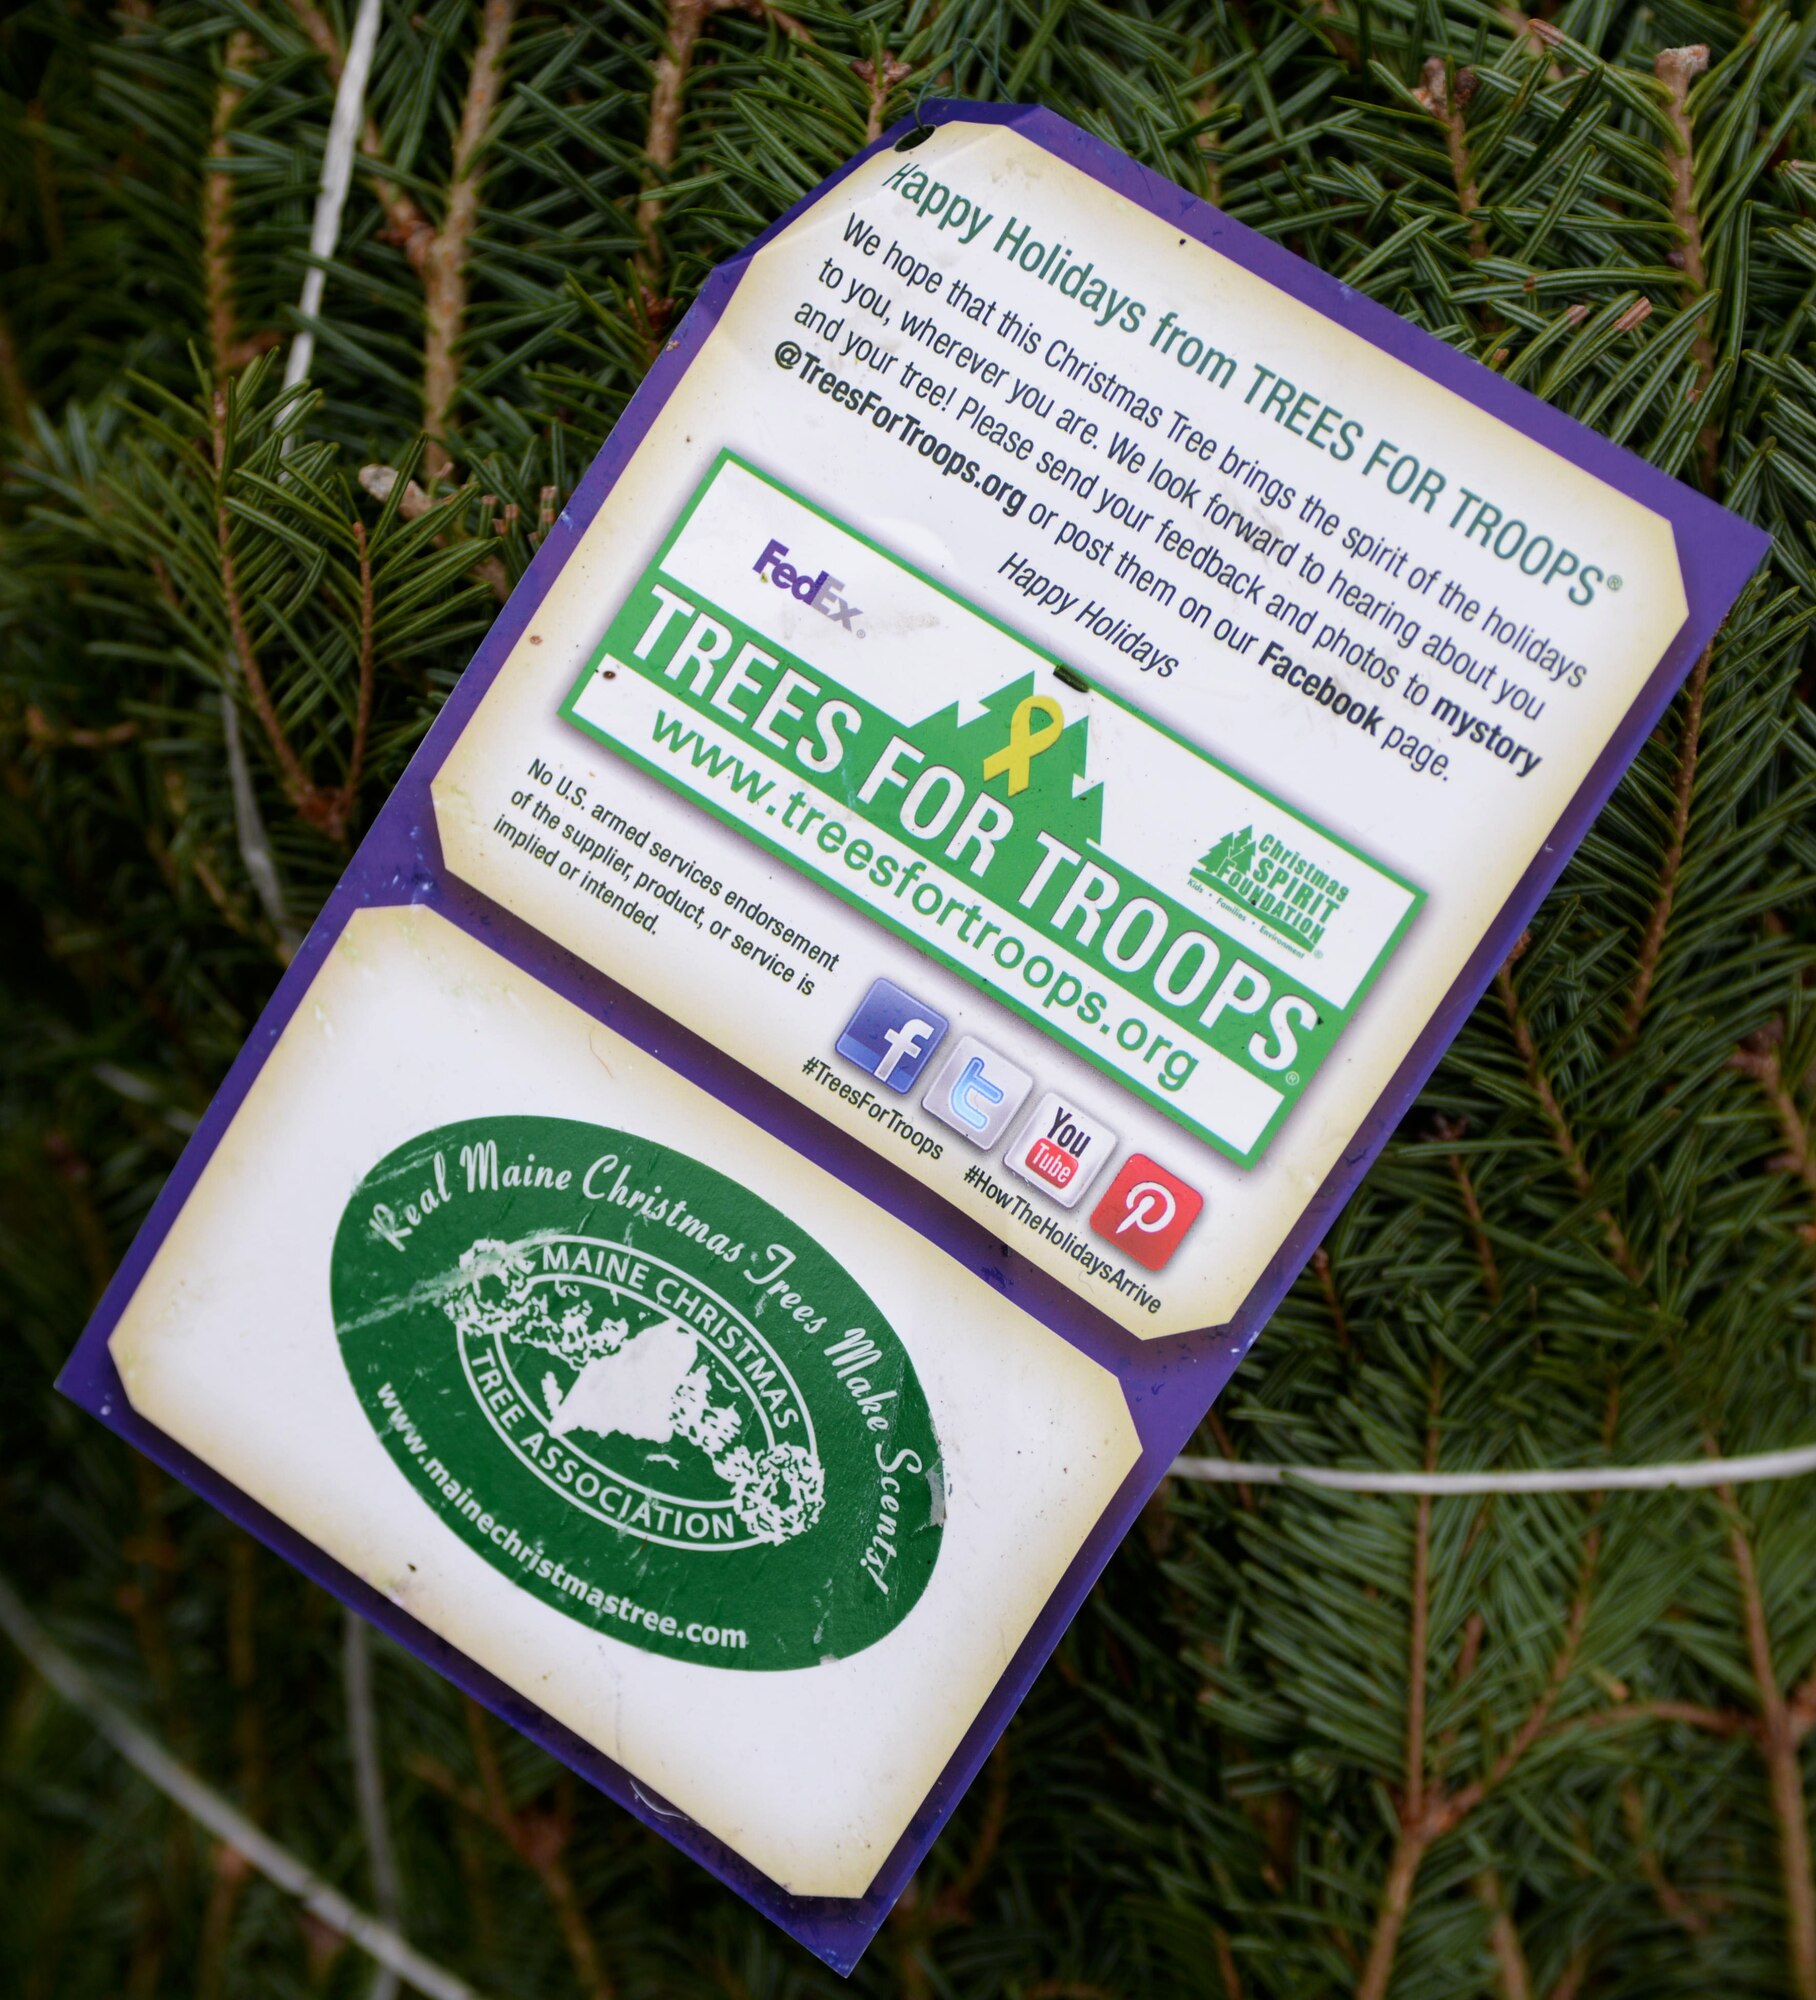 Airmen stationed at Ellsworth Air Force Base, S.D., received a shipment of 175 real Christmas trees during Ellsworth’s ninth annual Trees for Troops program Dec. 2, 2016. During the busy weeks leading up to Christmas, more than 18,000 real trees will be delivered to approximately 65 military bases. (U.S. Air Force photo by Airman 1st Class Denise M. Jenson)